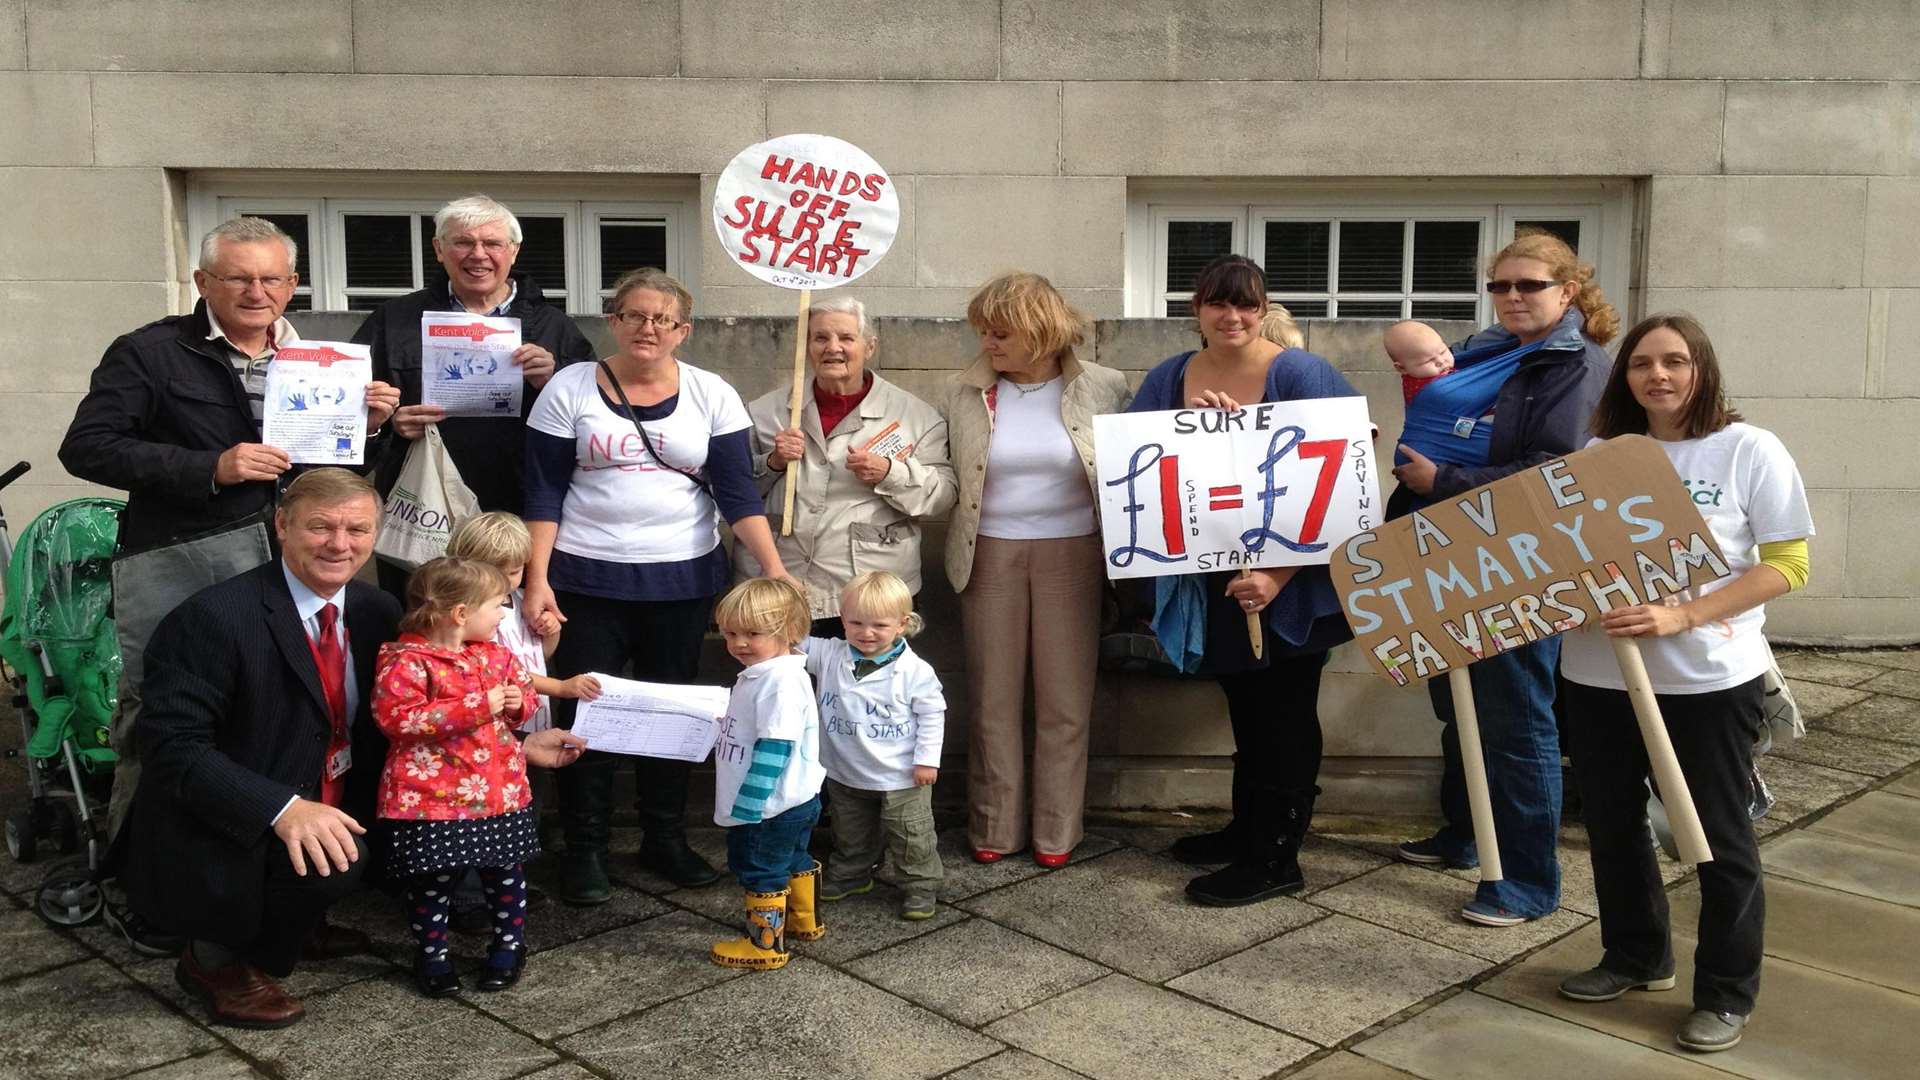 A previous Sure Start protest and petition handover.